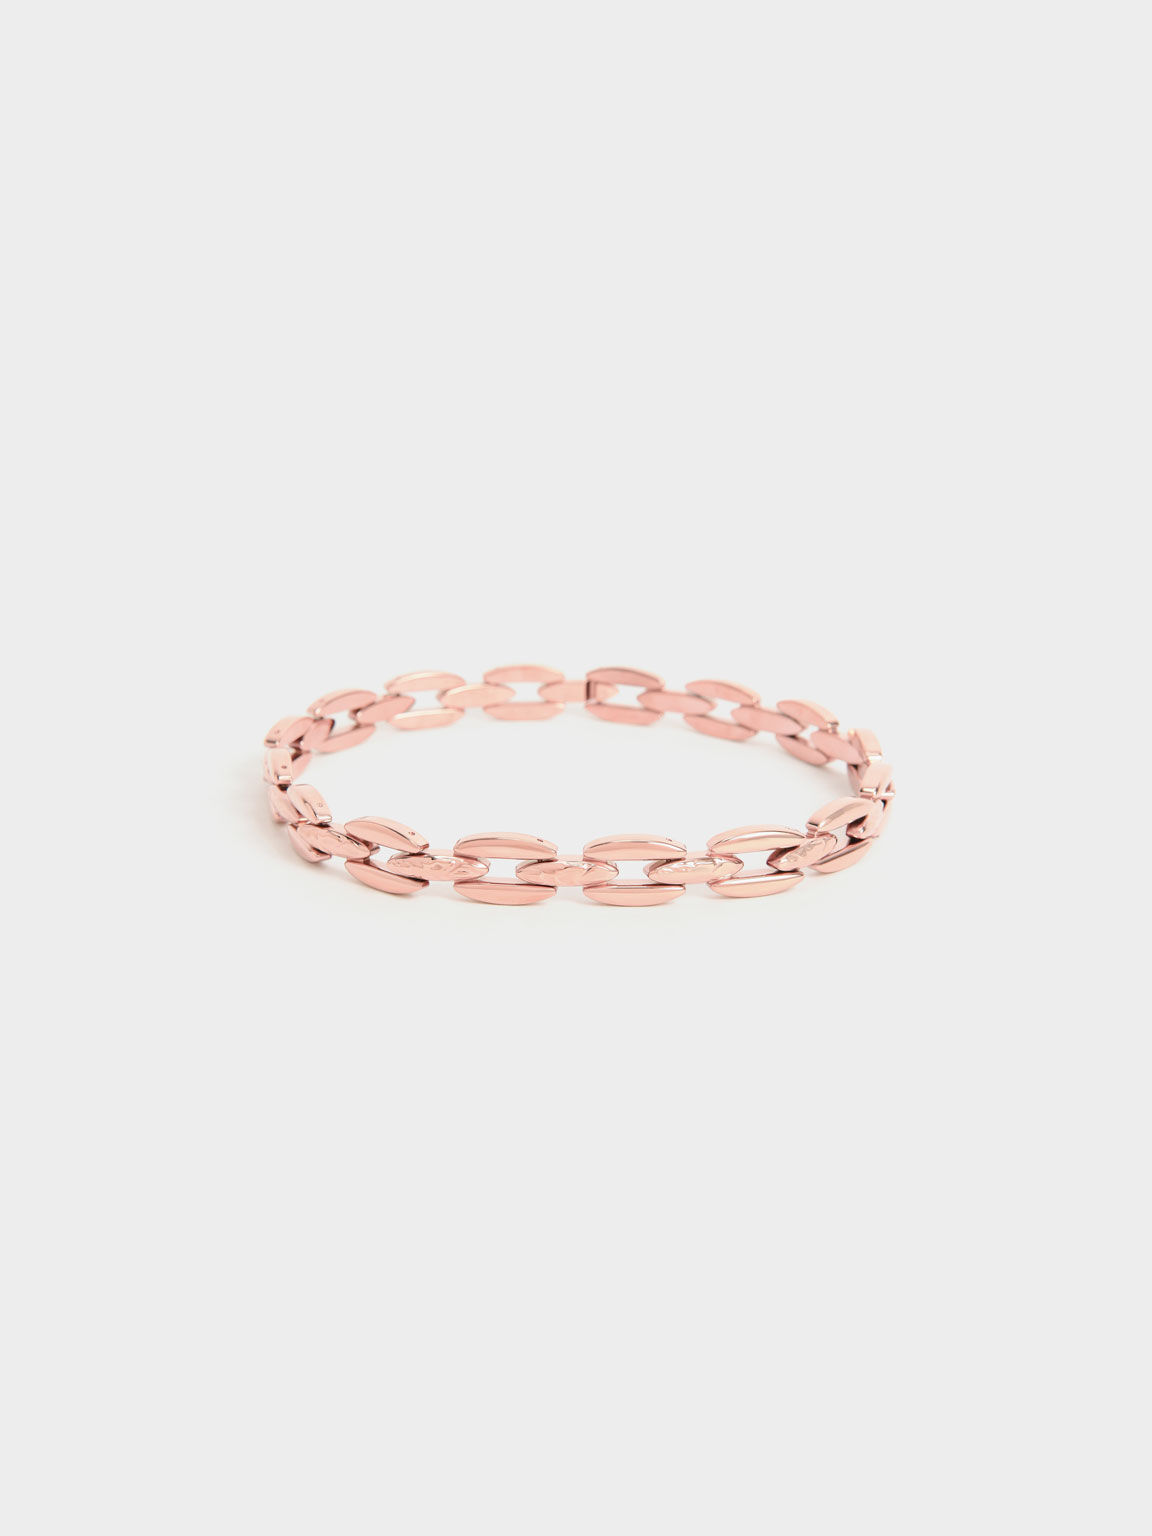 Chain-Link Choker Necklace, Rose Gold, hi-res